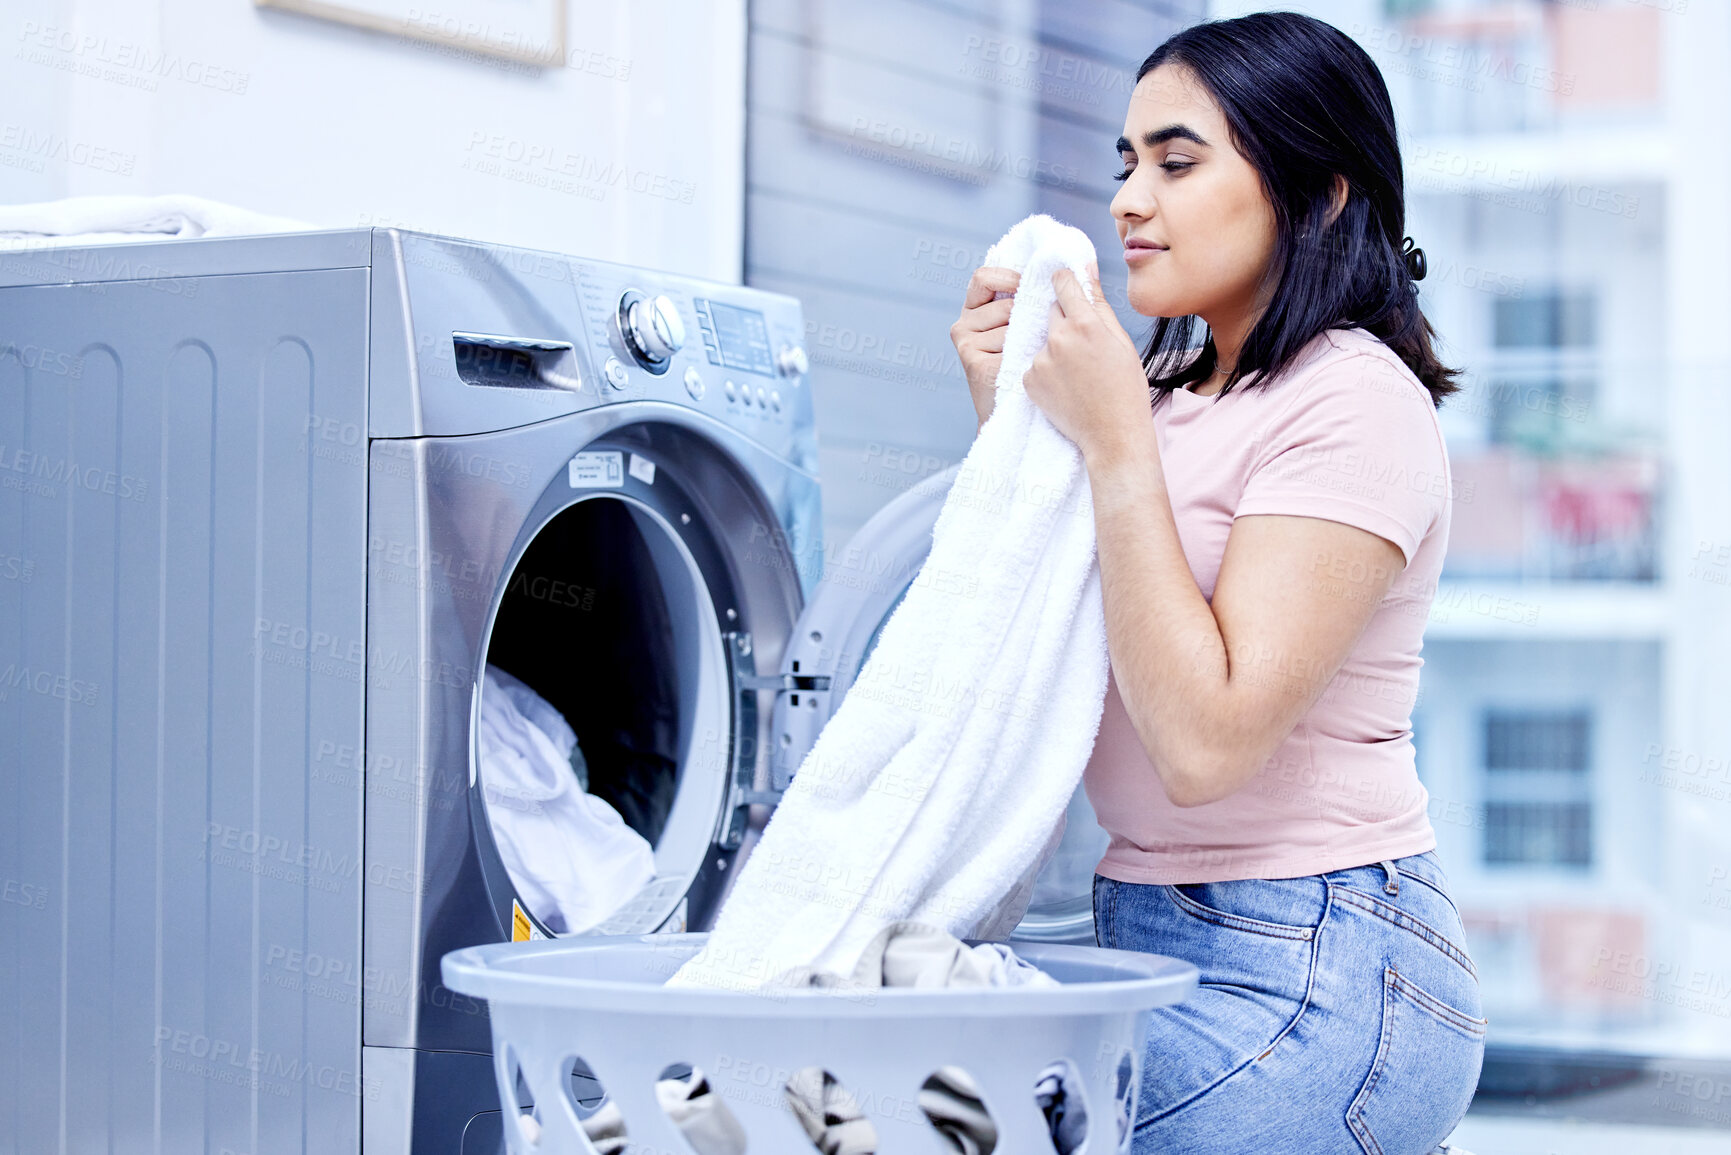 Buy stock photo Laundry machine, smell and woman in home for cleaning, hygiene and housework in the morning. Chores, scent and girl with fresh fabric, cotton clothes and textile towel in washing basket for service